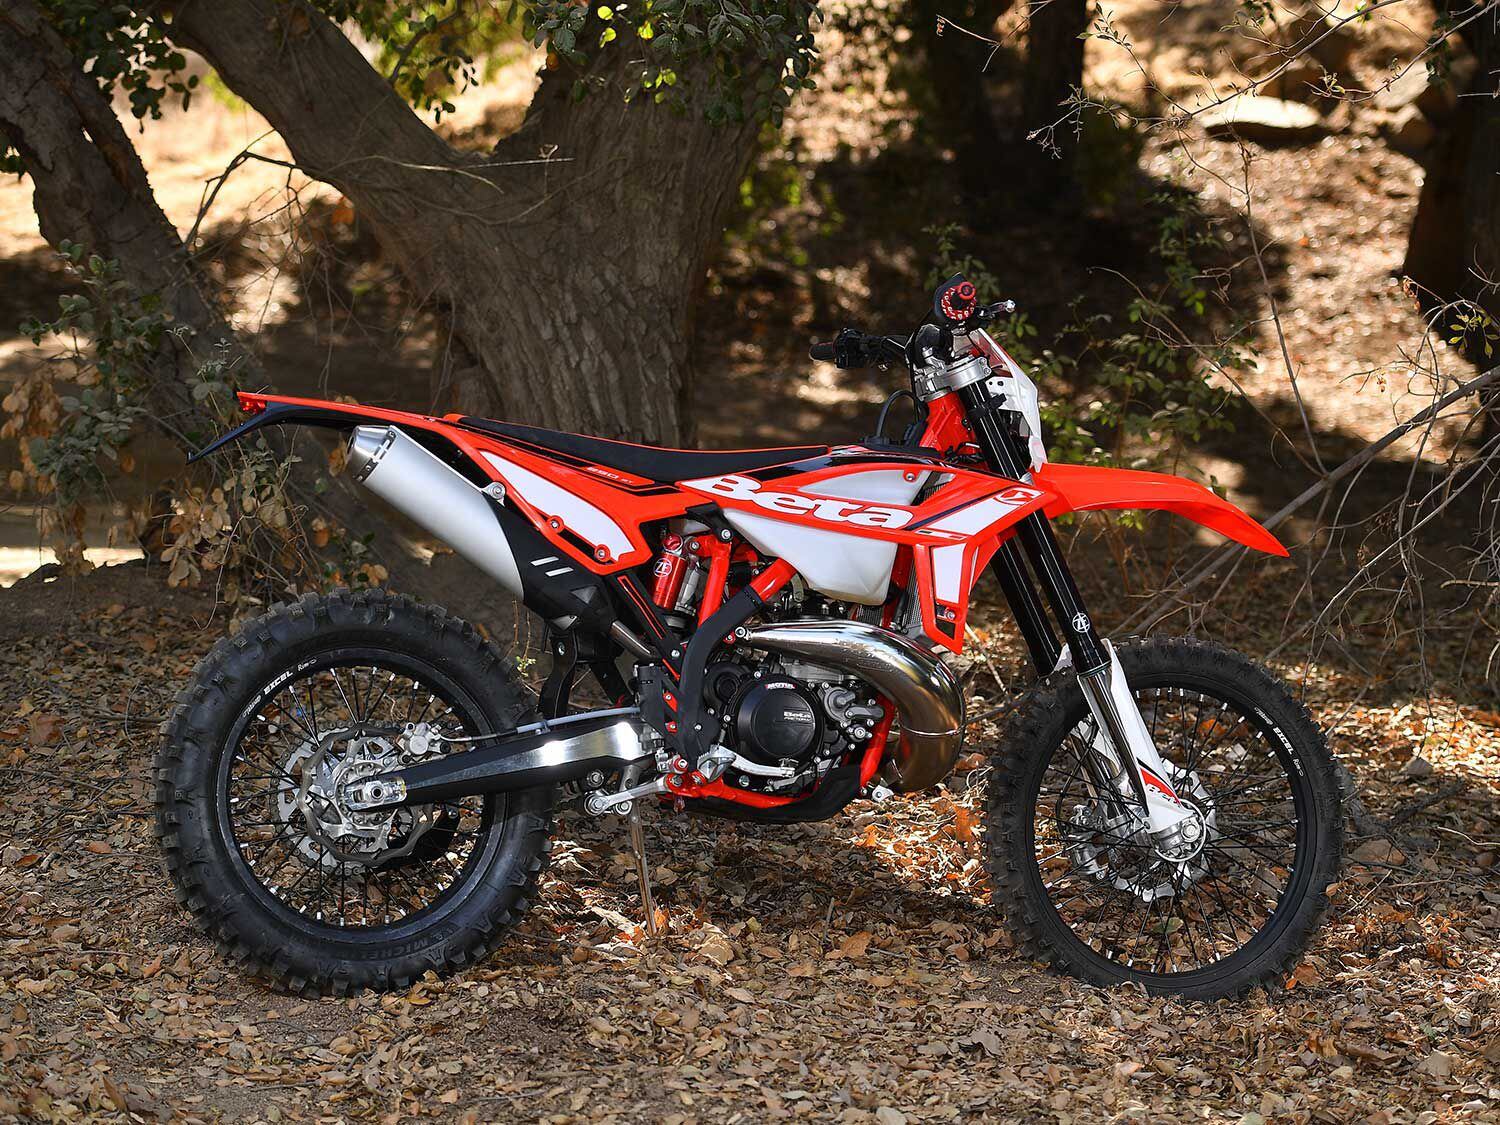 After enjoying a major overhaul last year, the Beta 250 RR returns for 2021 with changes to the shim stacks in the fork and shock, a stronger rear subframe, a new seat foam and seat base, an improved air filter housing, new mounting of the side panel, and different color plastics.